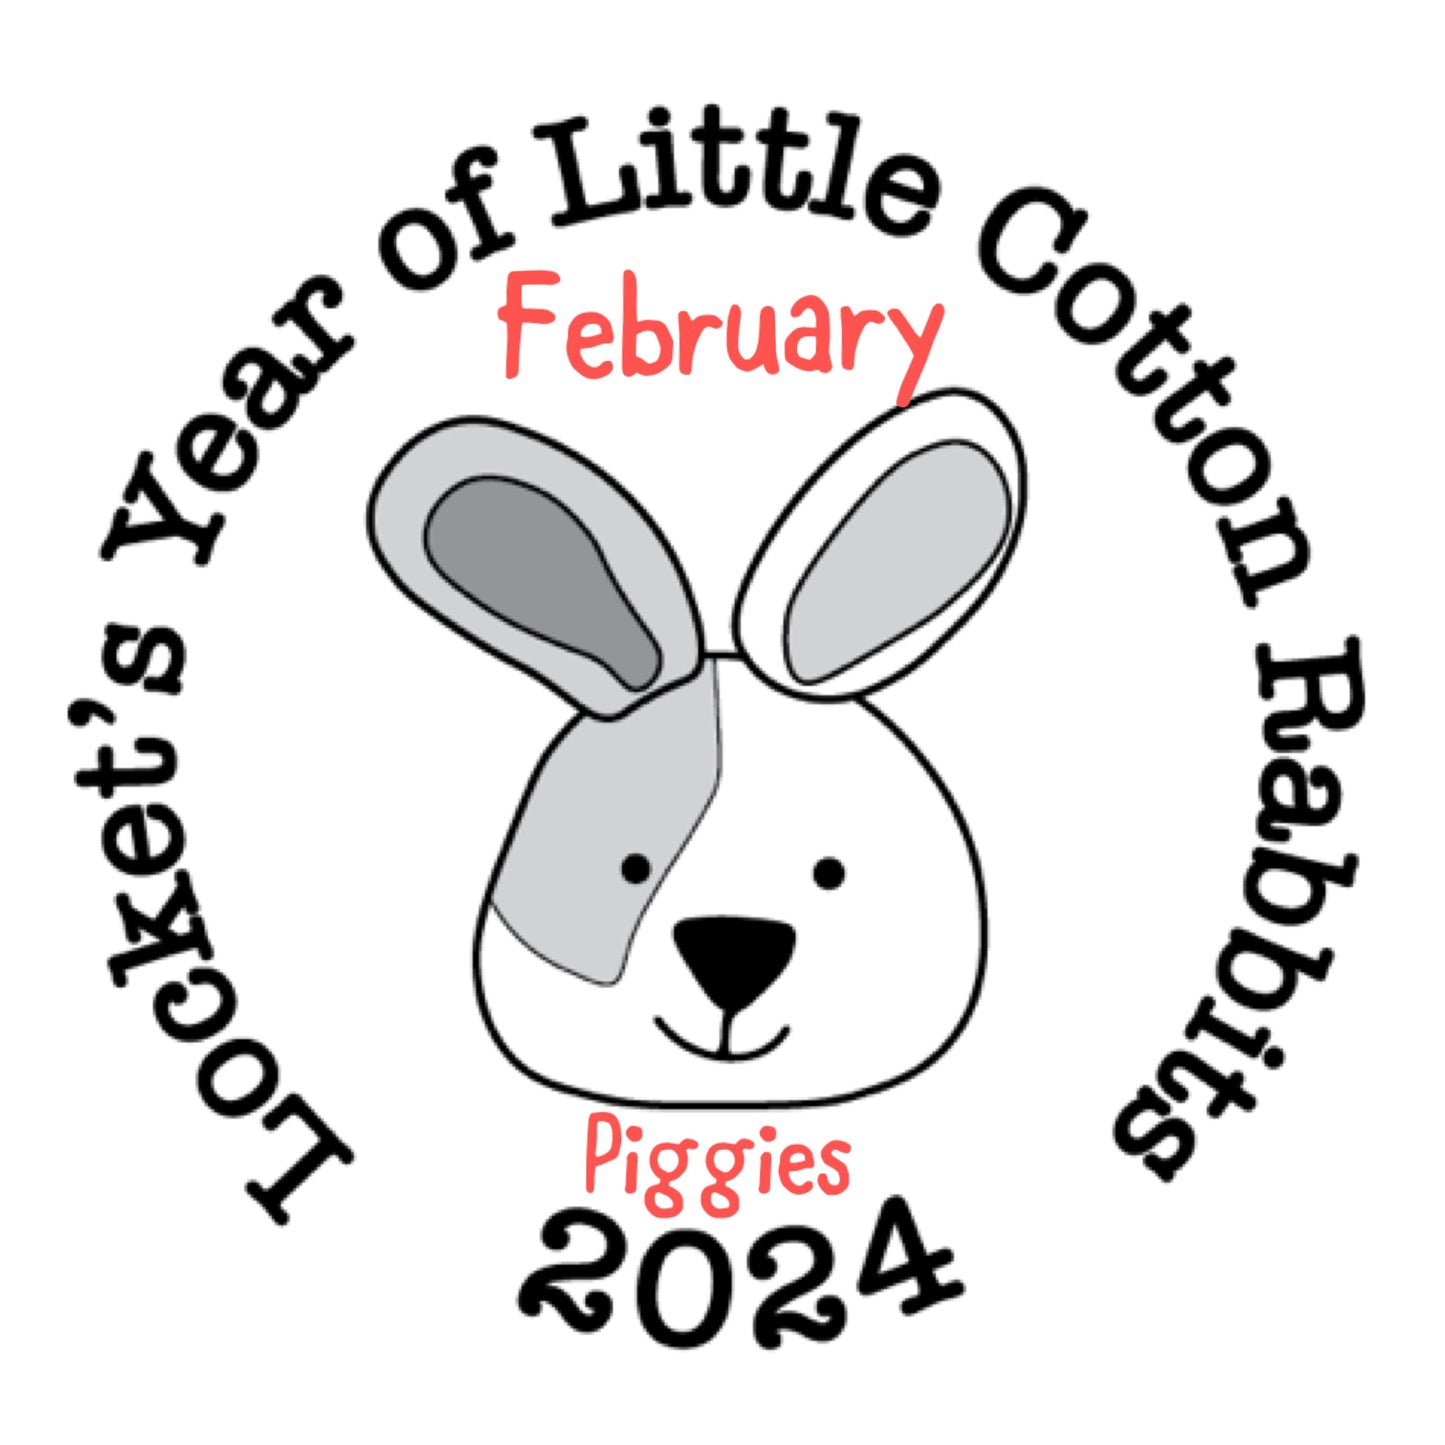 PRE-ORDER Locket's Year of Little Cotton Rabbits - February - Piggy in a Jumper